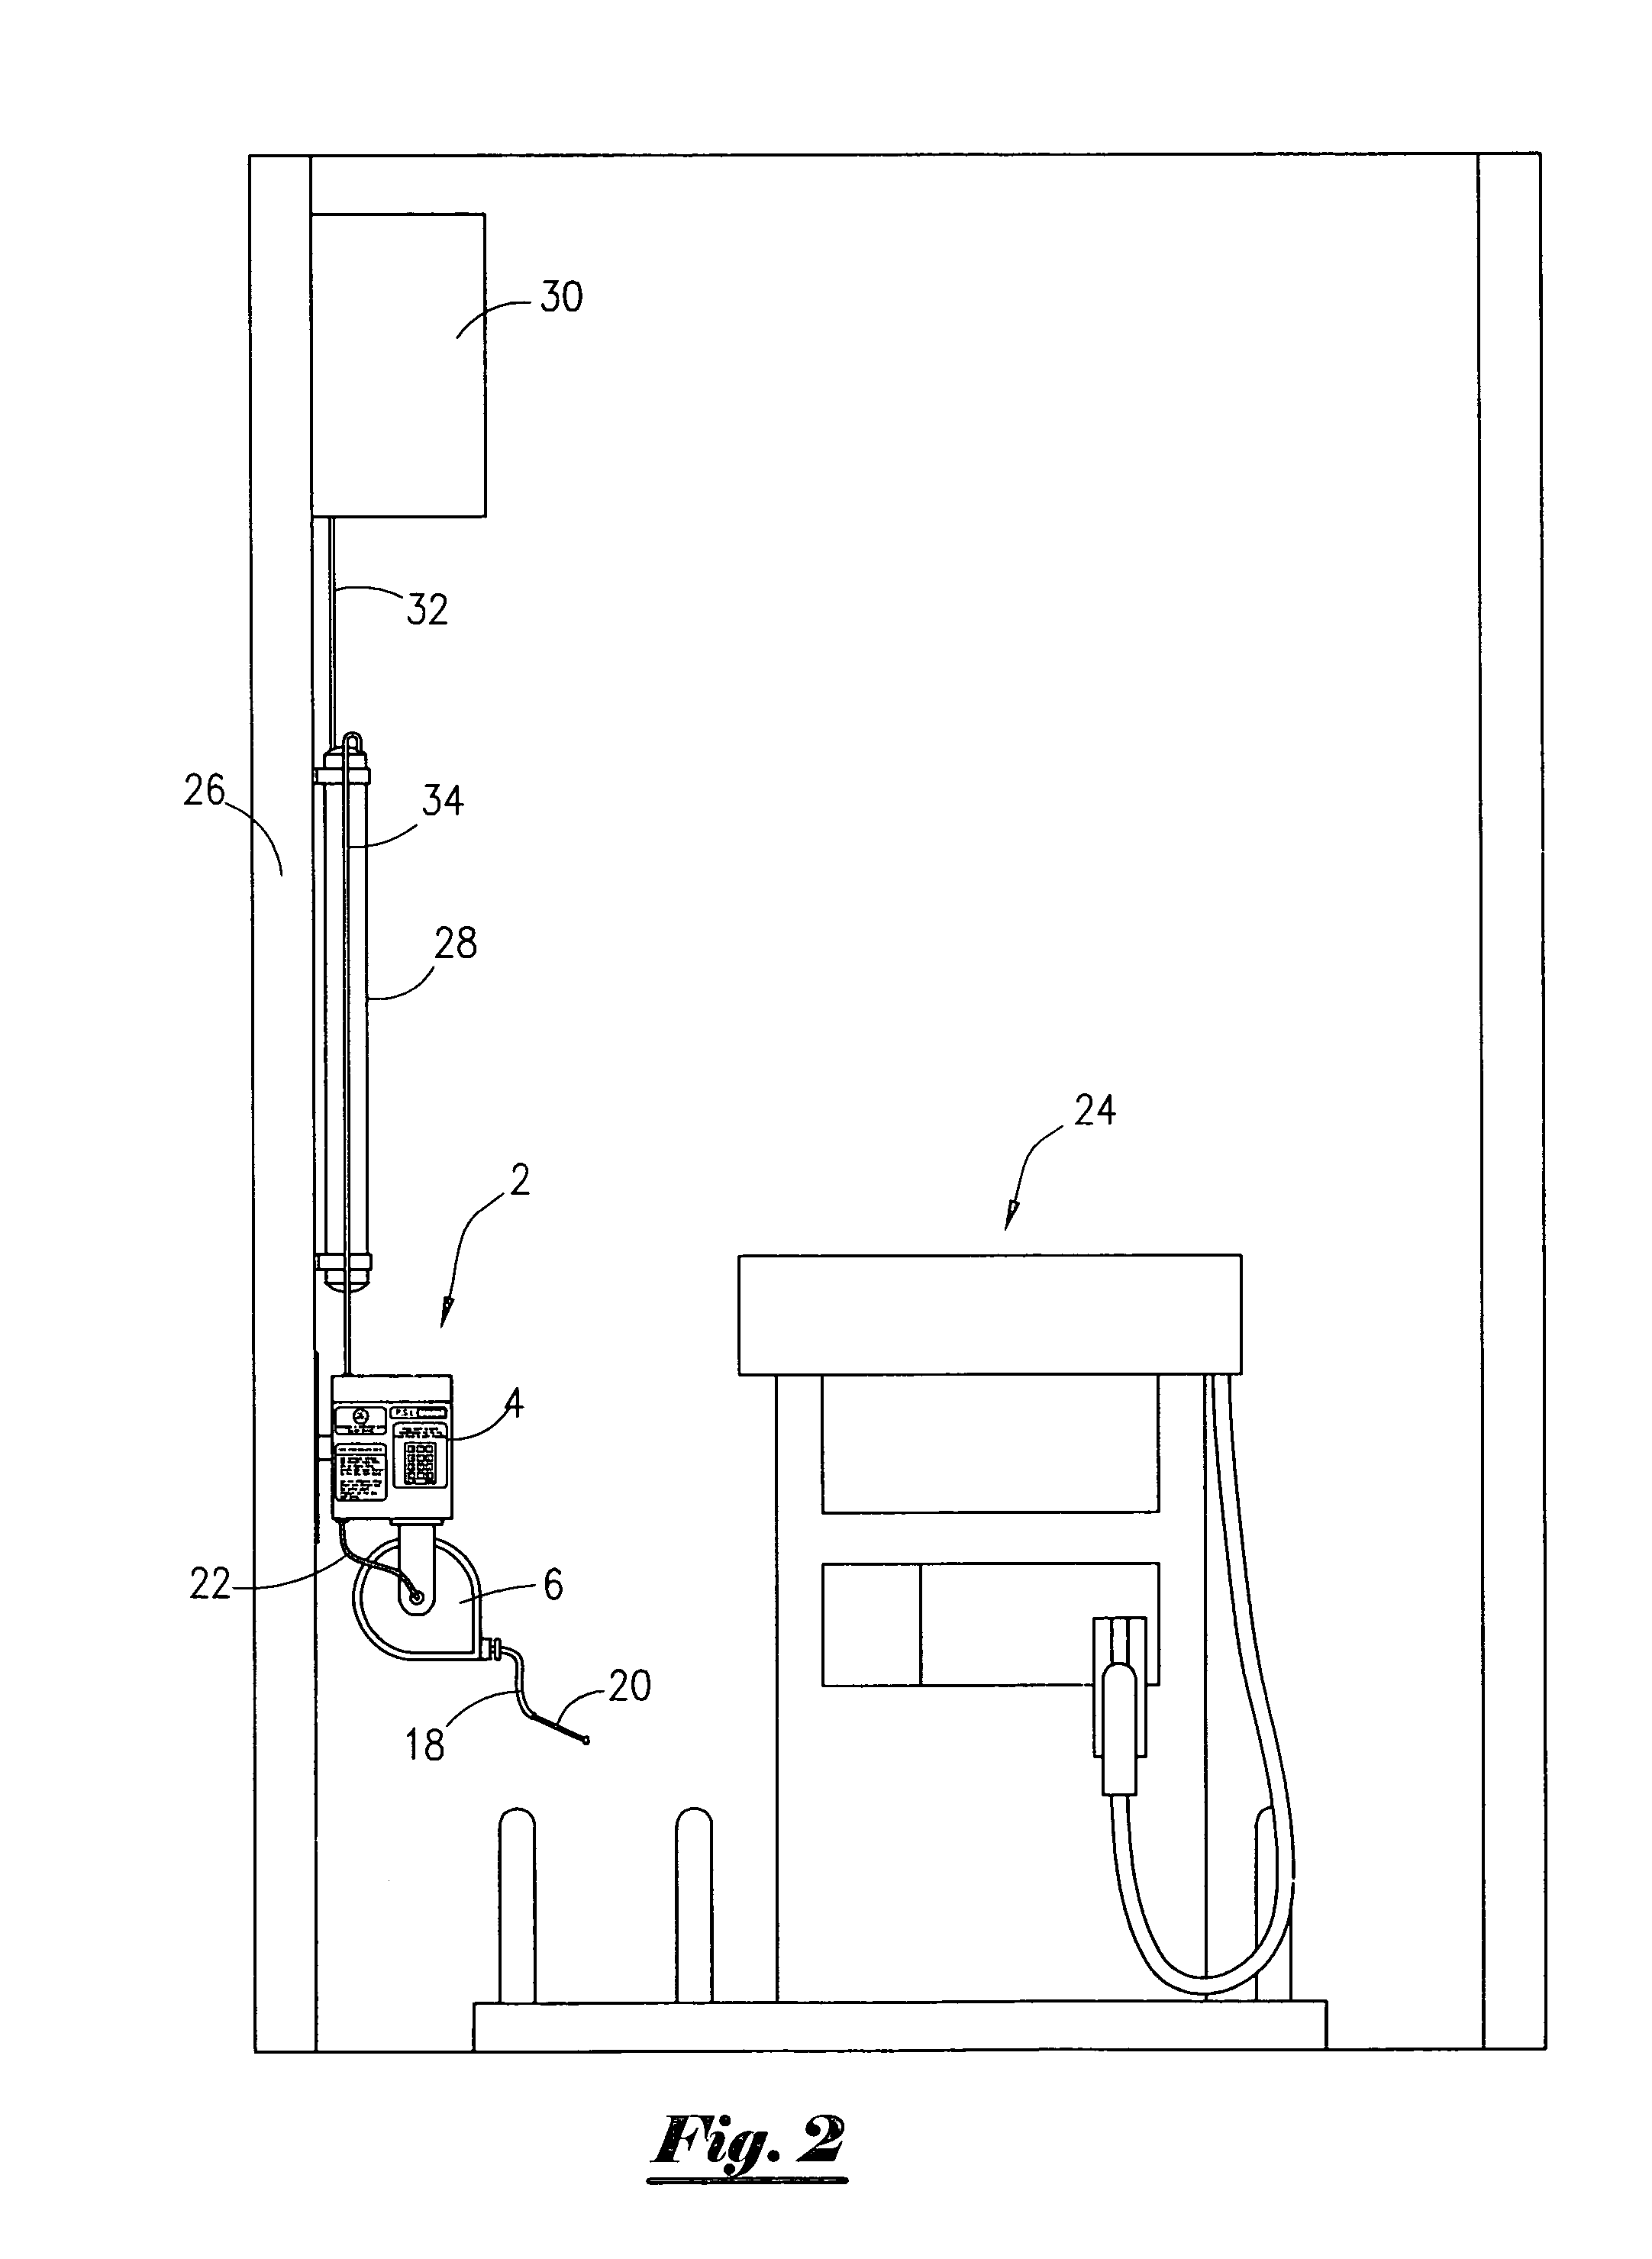 Automated apparatus and method for tire pressure maintenance